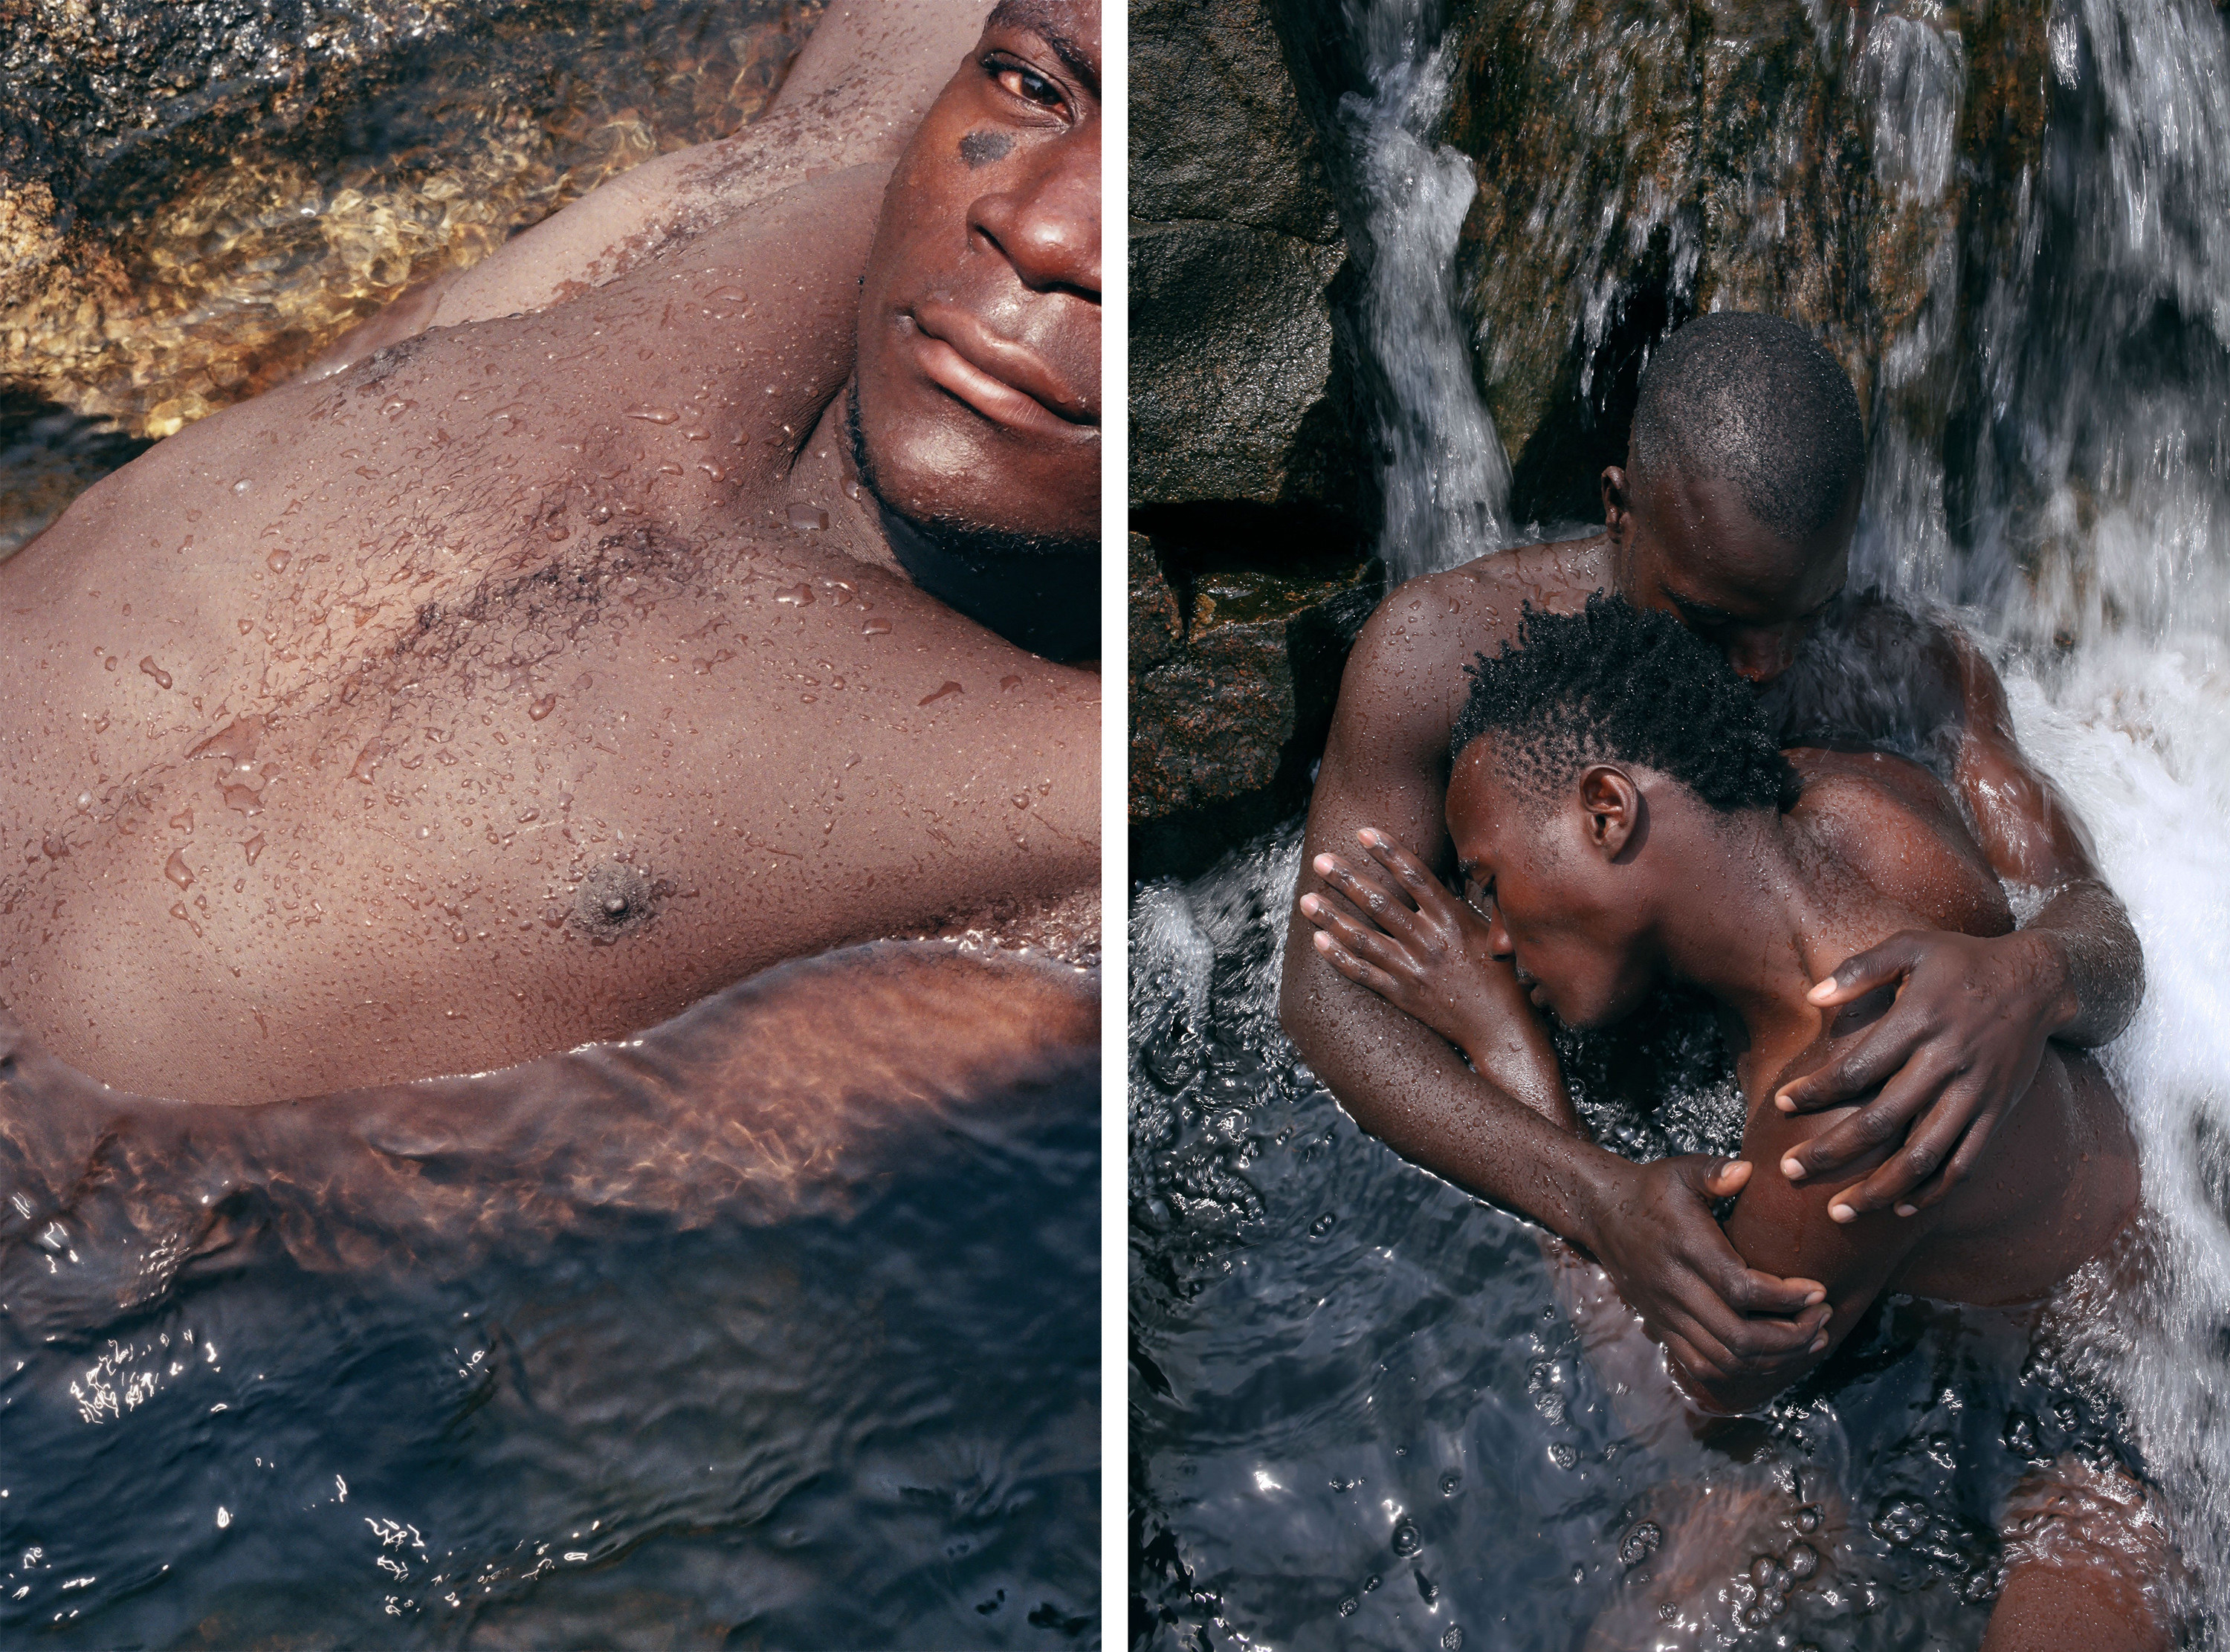 A man lying in the water stares at the camera, and two people embrace in the water